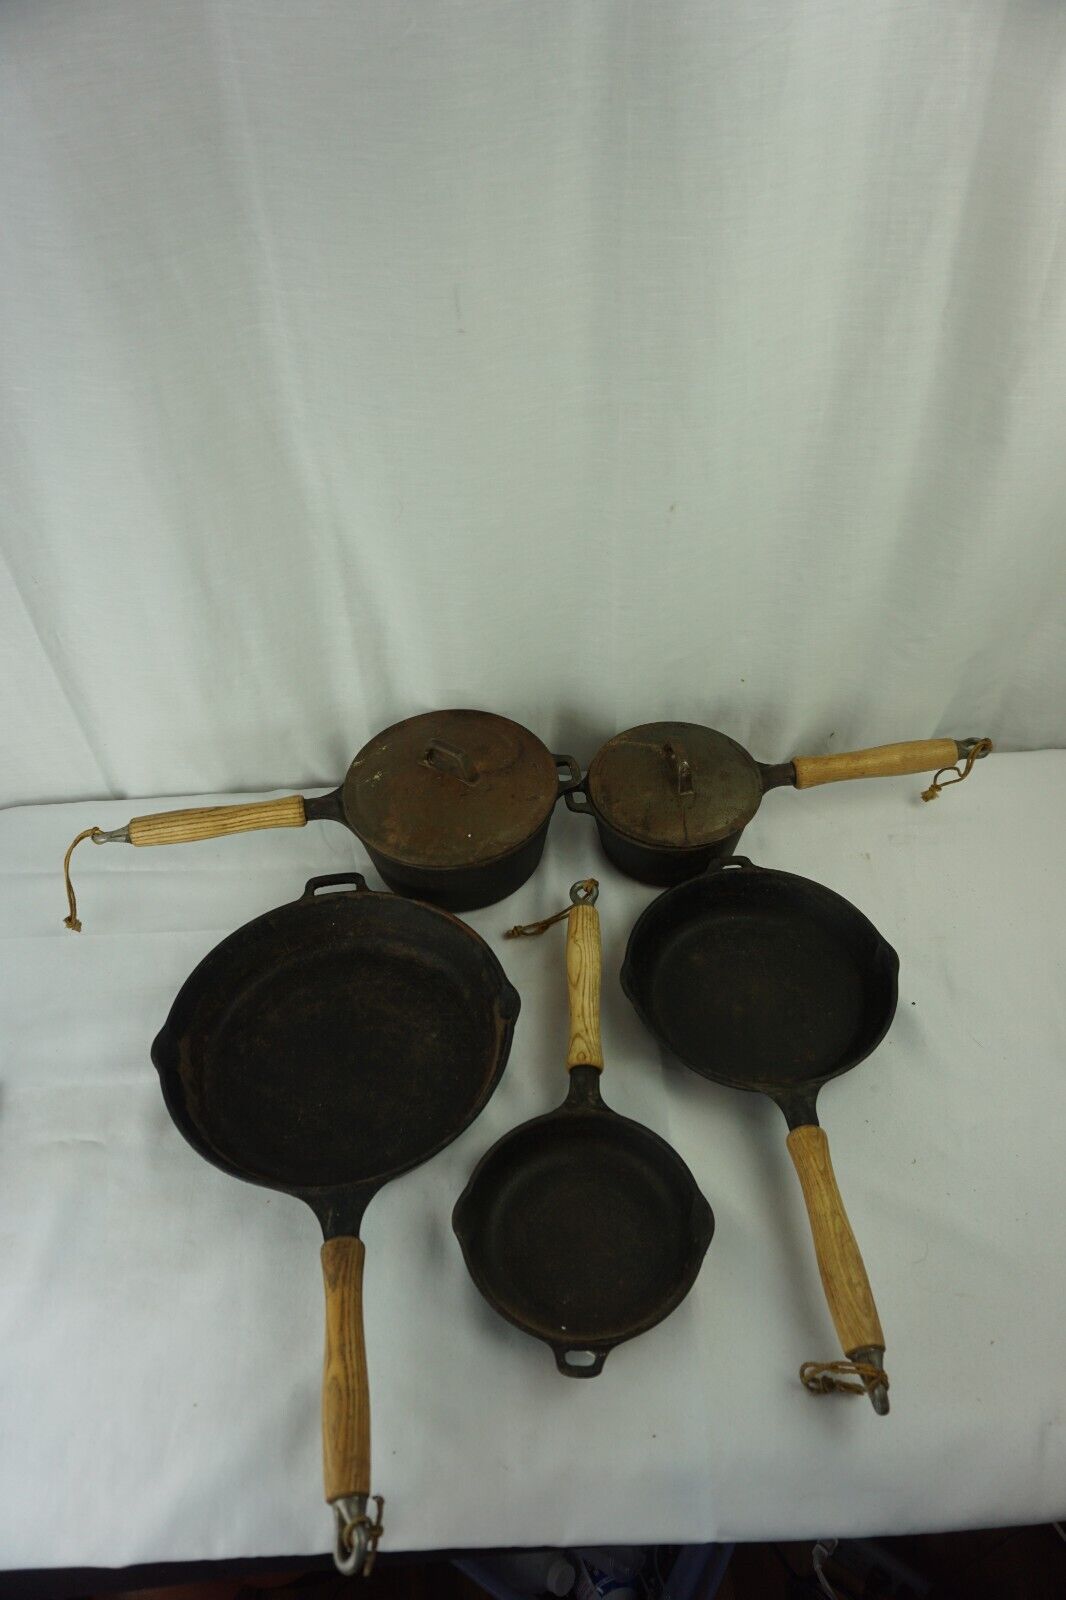 7 Piece Cast Iron Cooking Set 3 Wood Handled Skillets & 2 Small Kettles W/ Lids